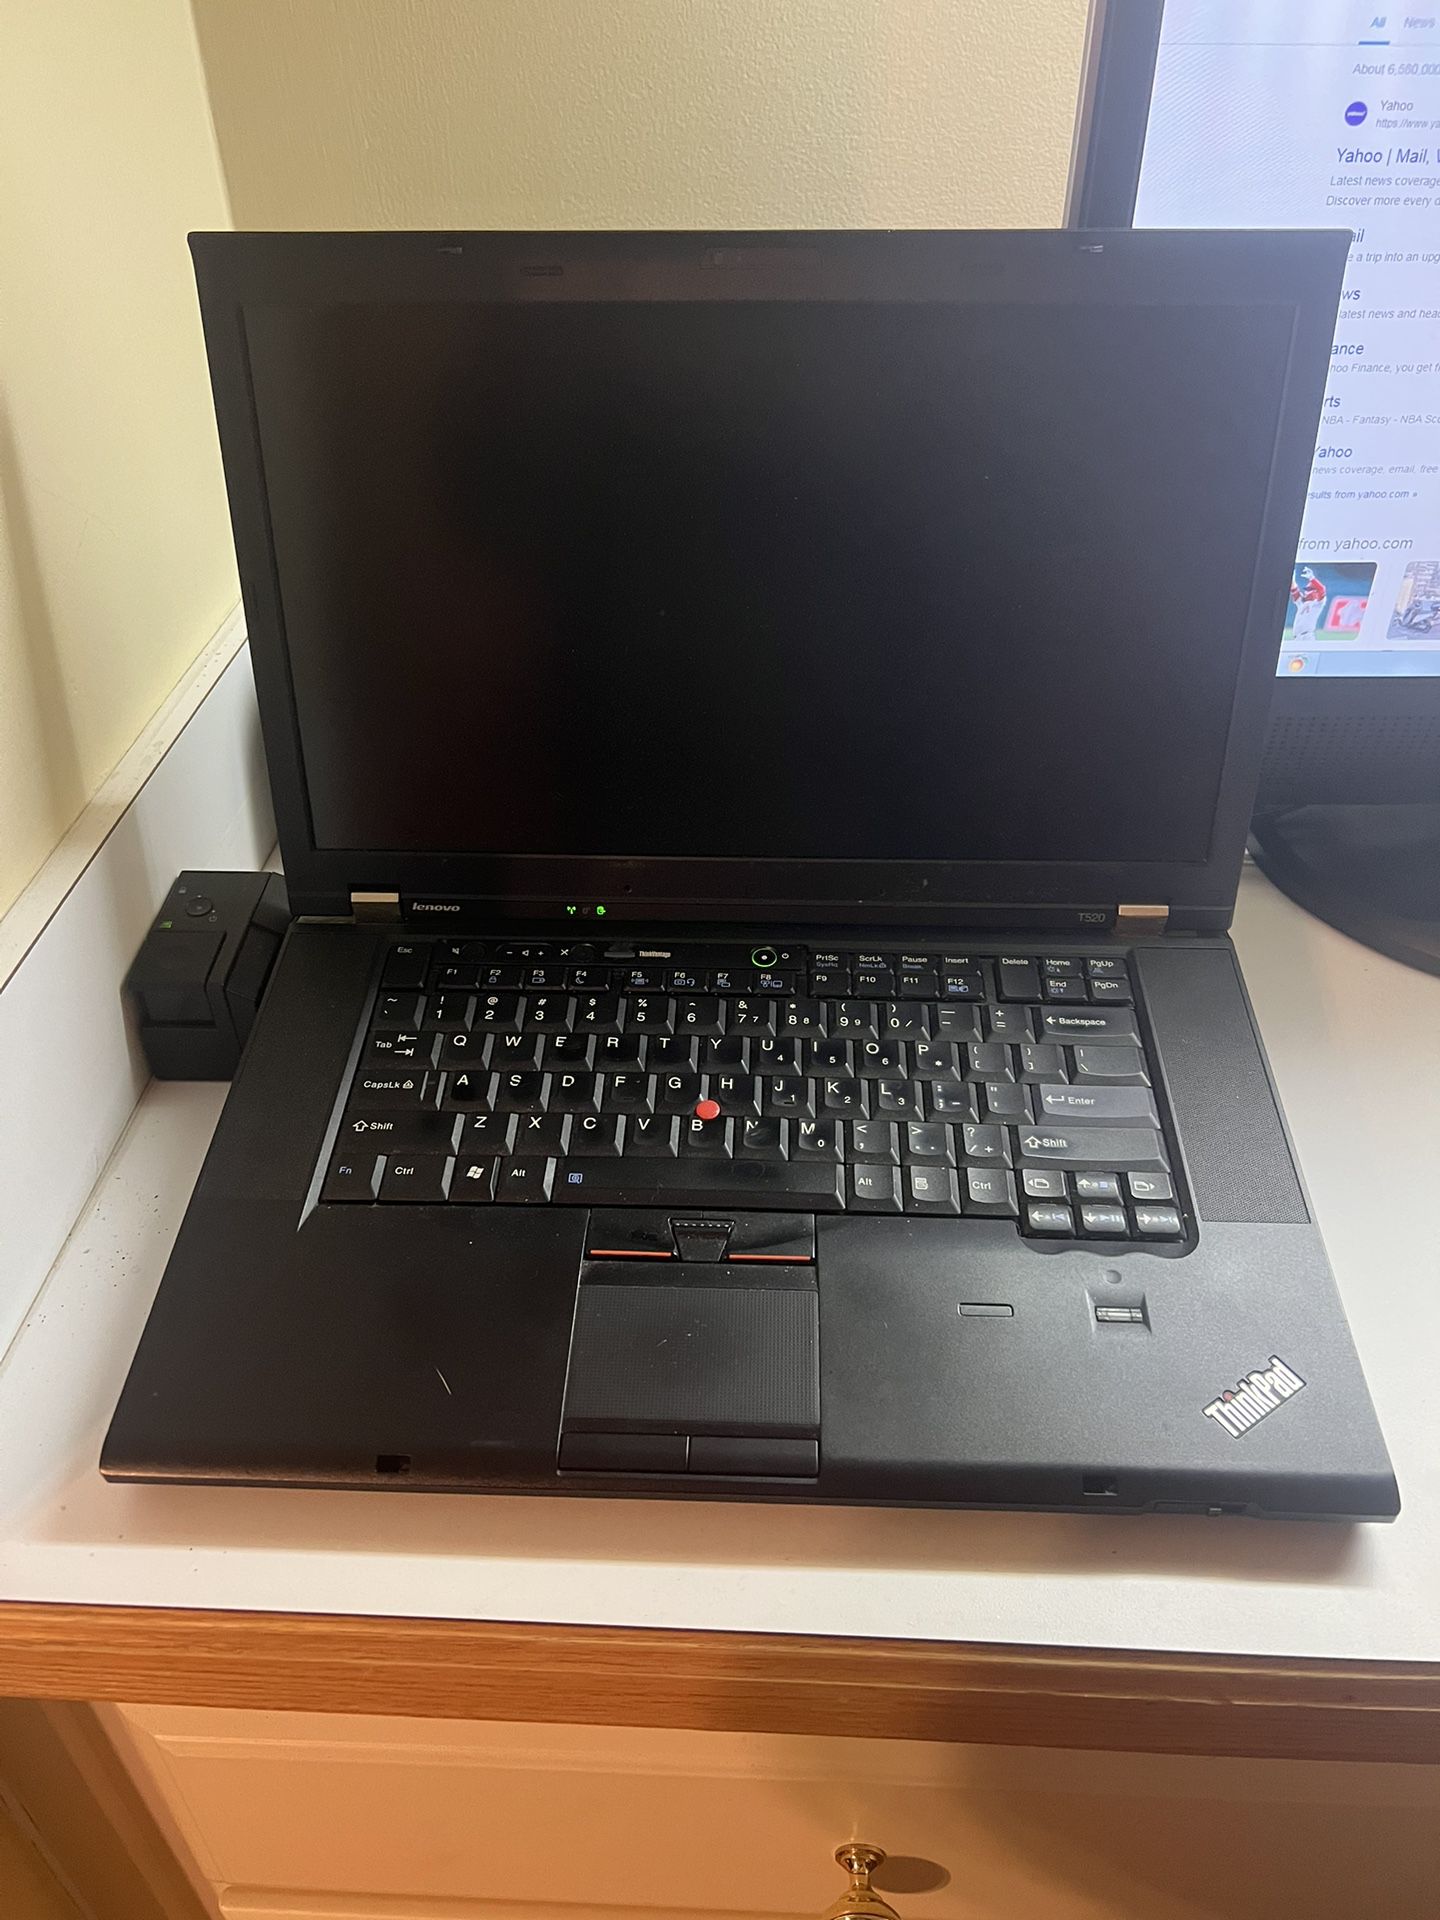 Lenovo ThinkPad T520 Laptop with Two Monitors